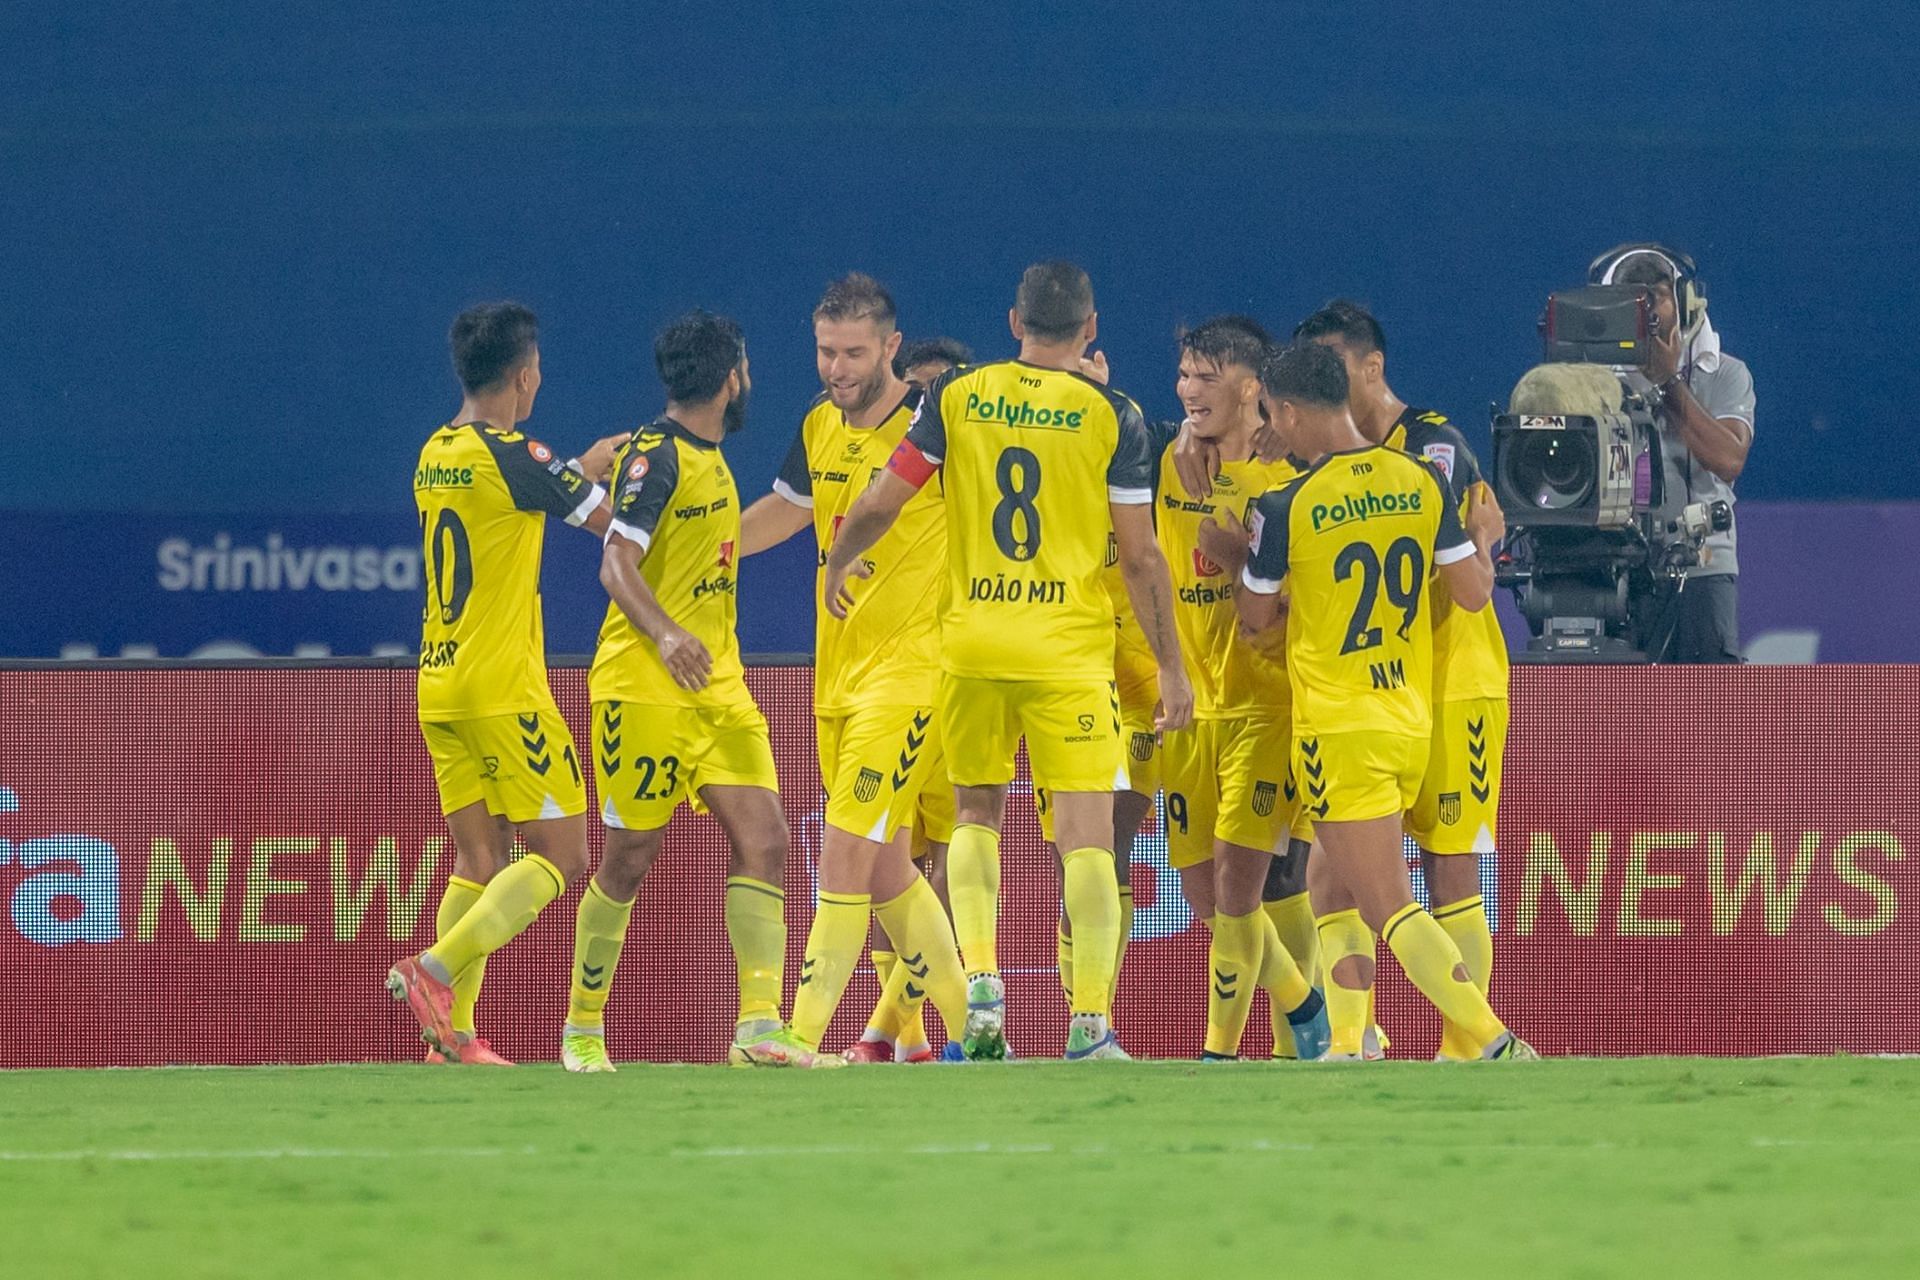 Hyderabad FC players celebrate after taking the lead against ATK Mohun Bagan. (Image Courtesy: ISL Media)